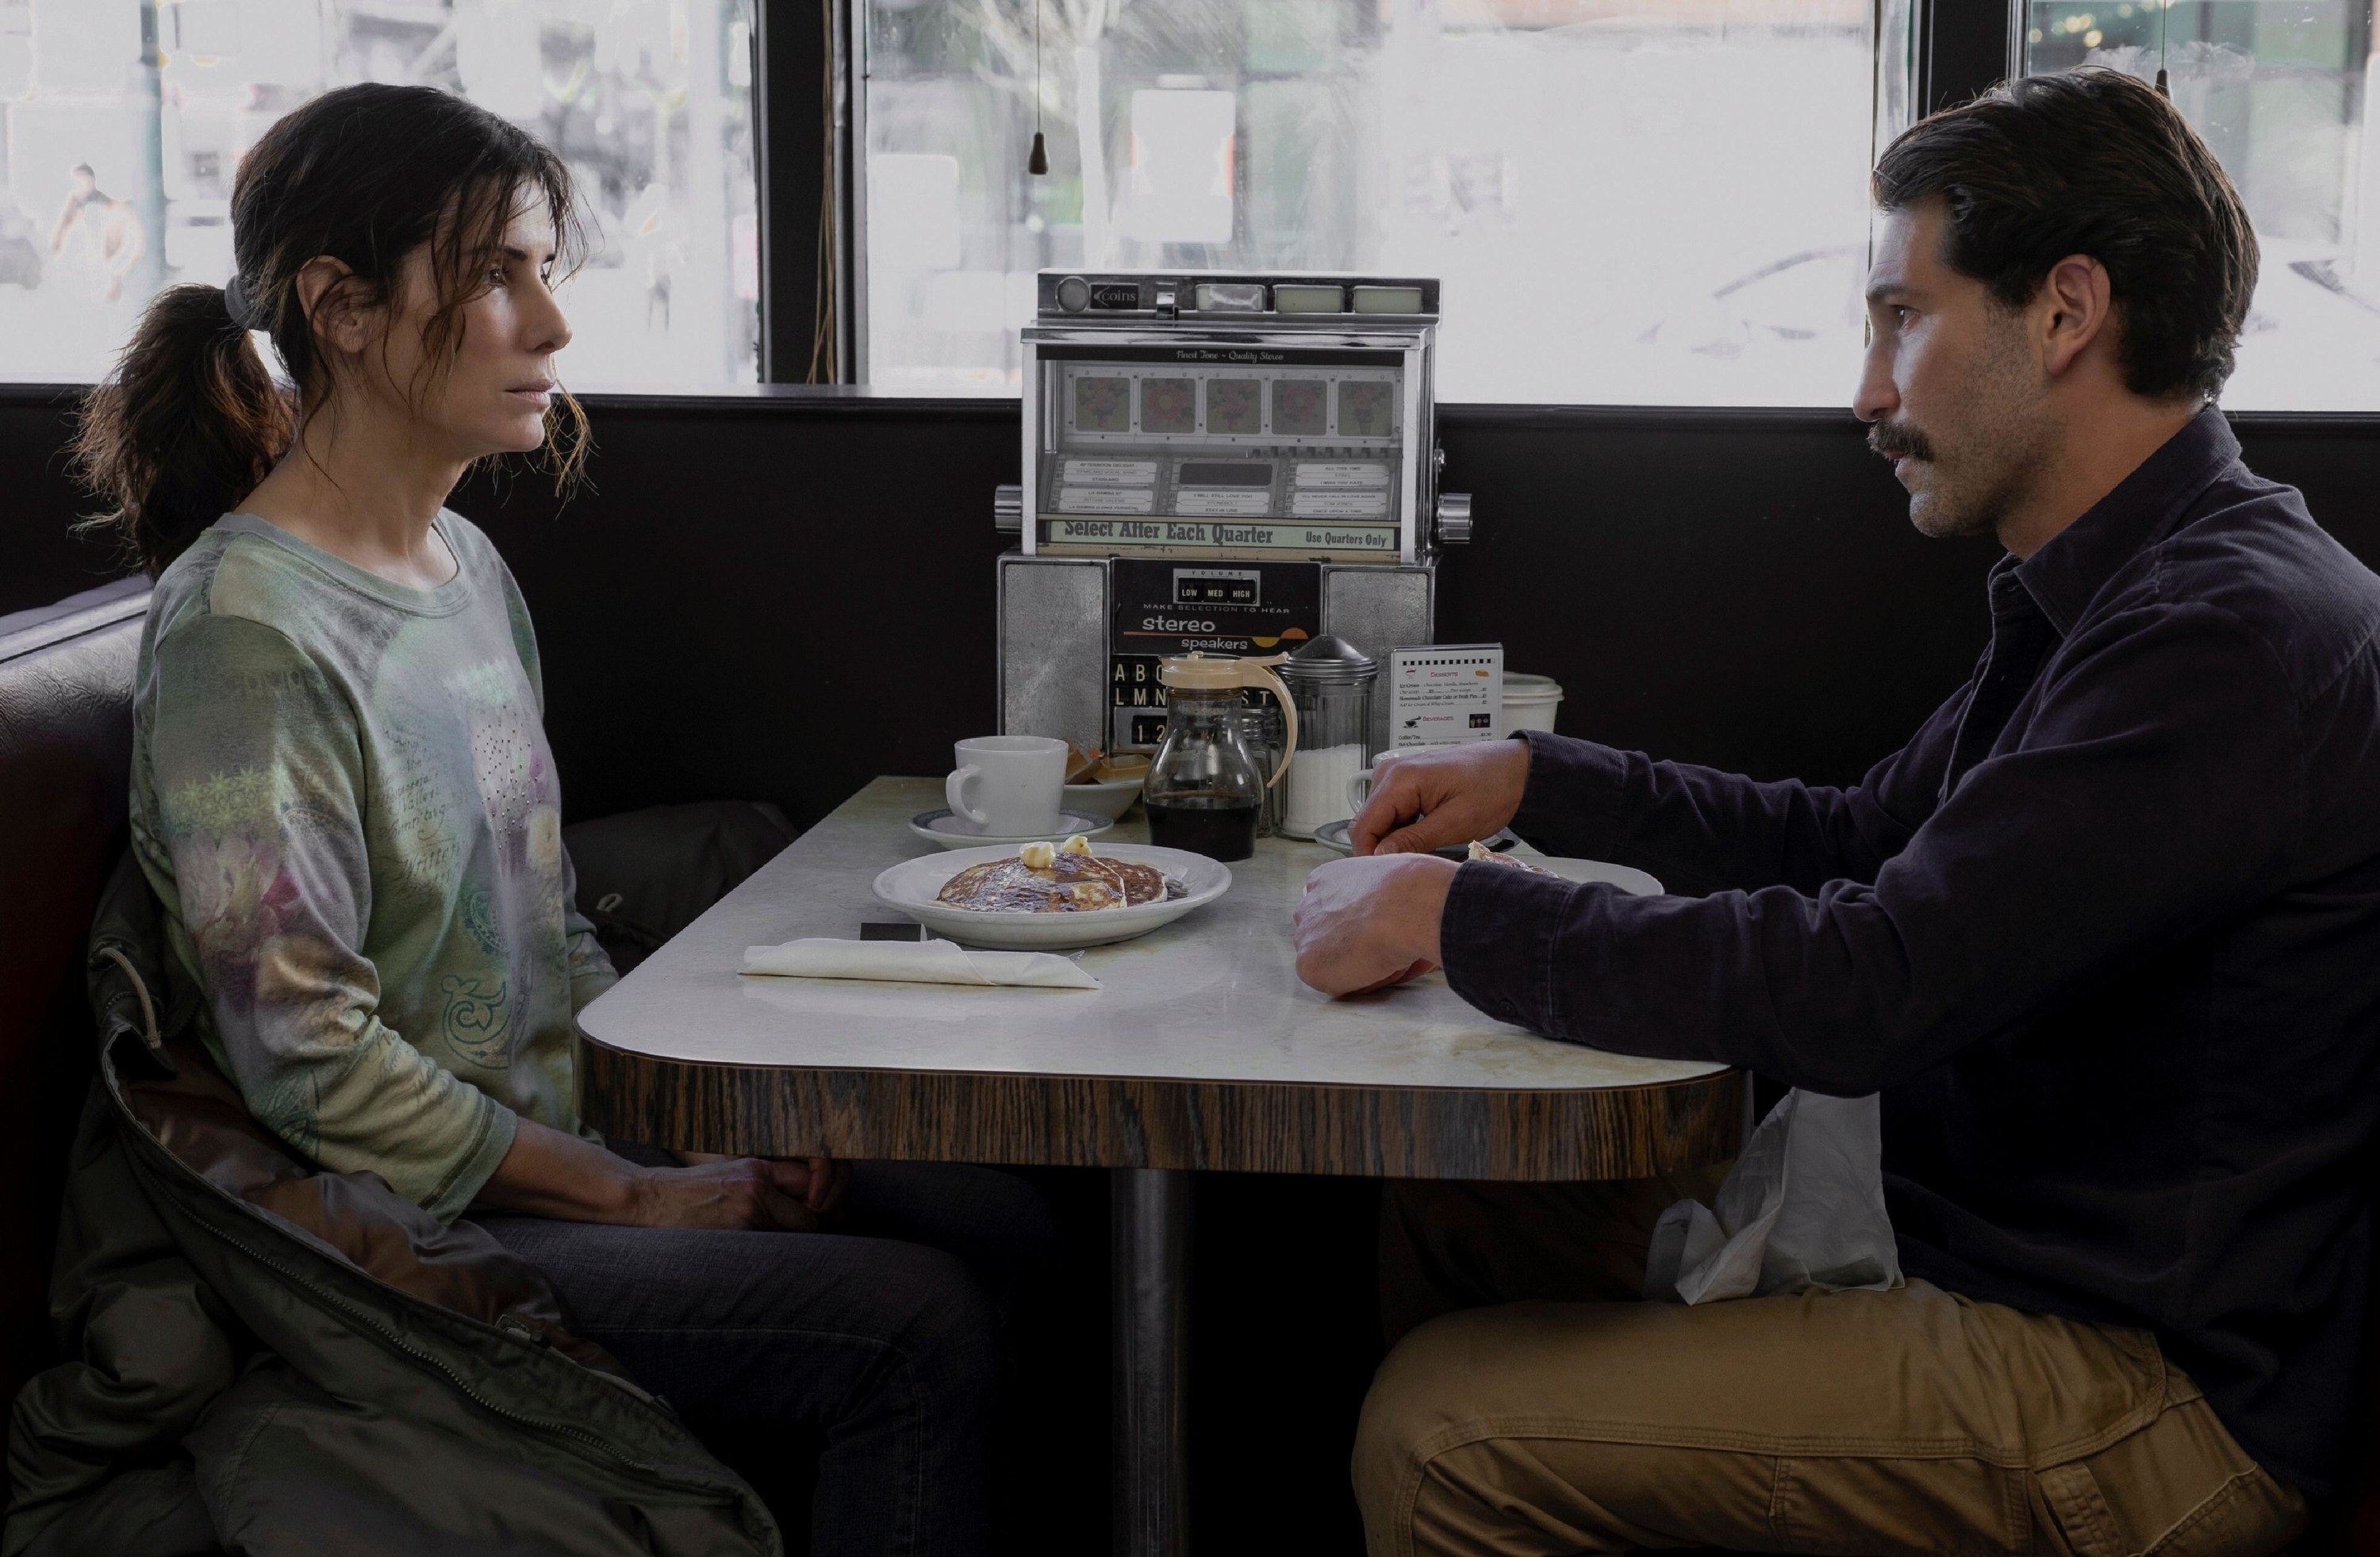 A woman sits a across a man at a diner with a plate of pancakes in between them